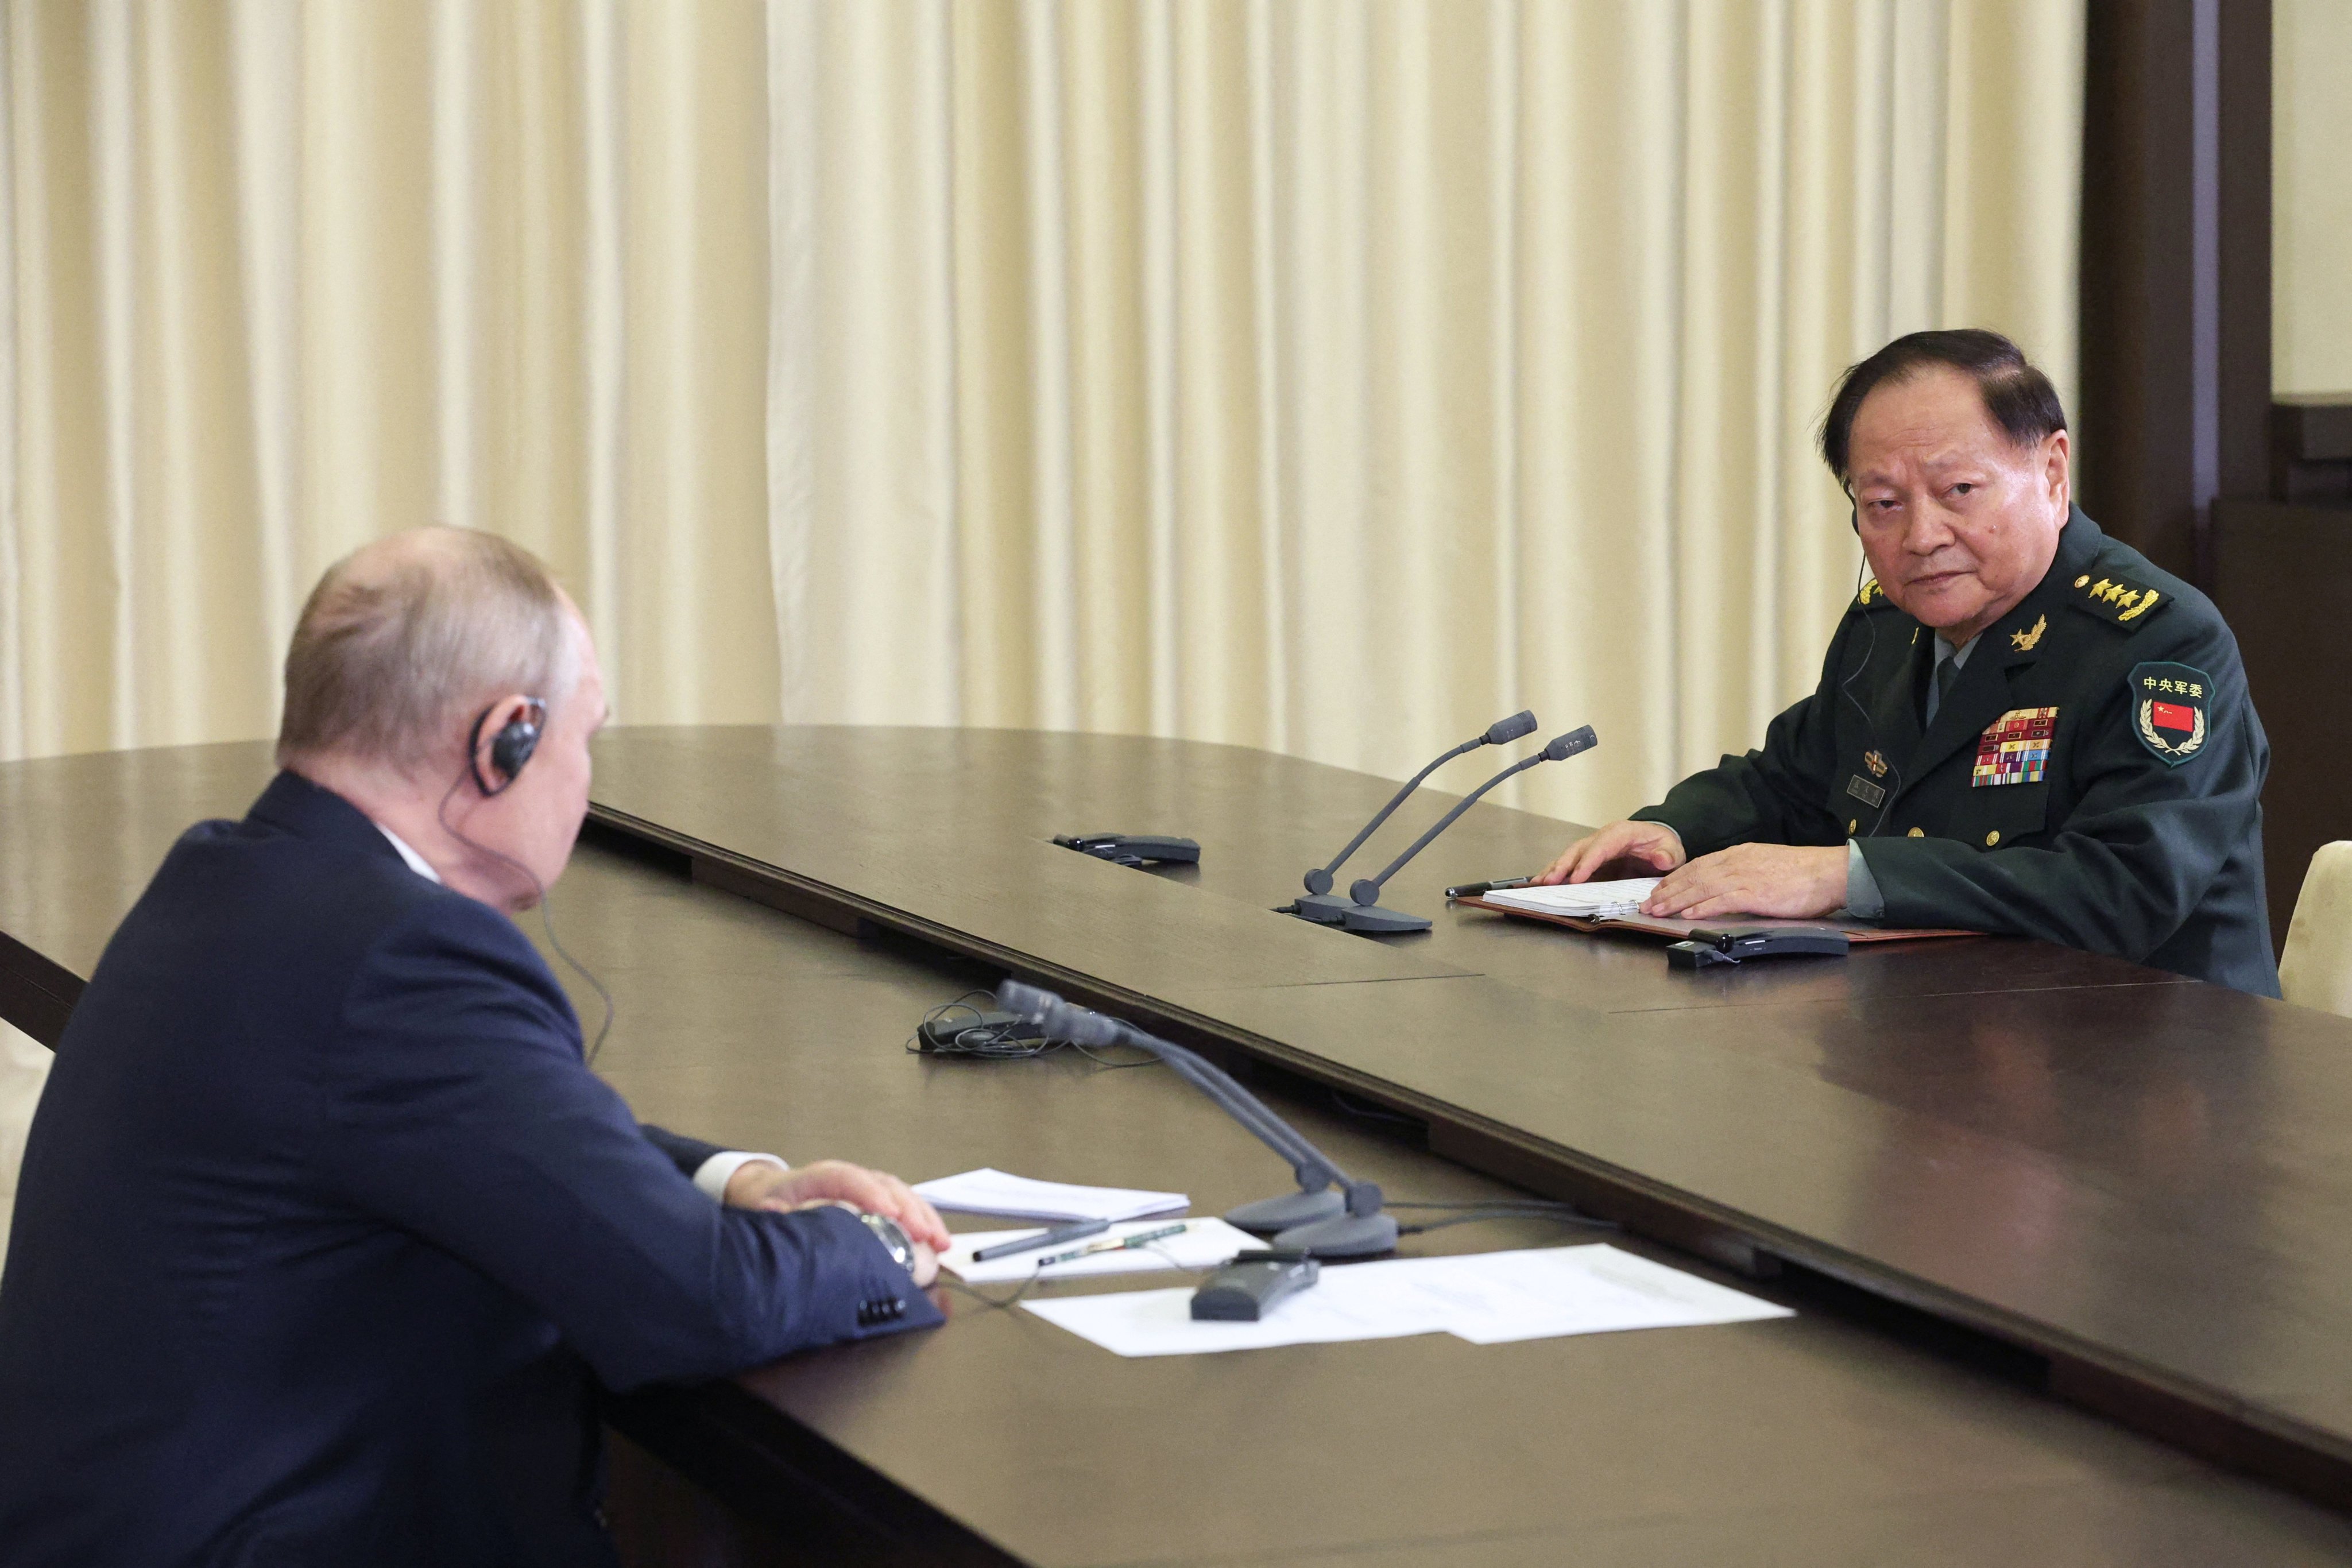 Russian President Vladimir Putin and General Zhang Youxia pictured at their meeting in Moscow.